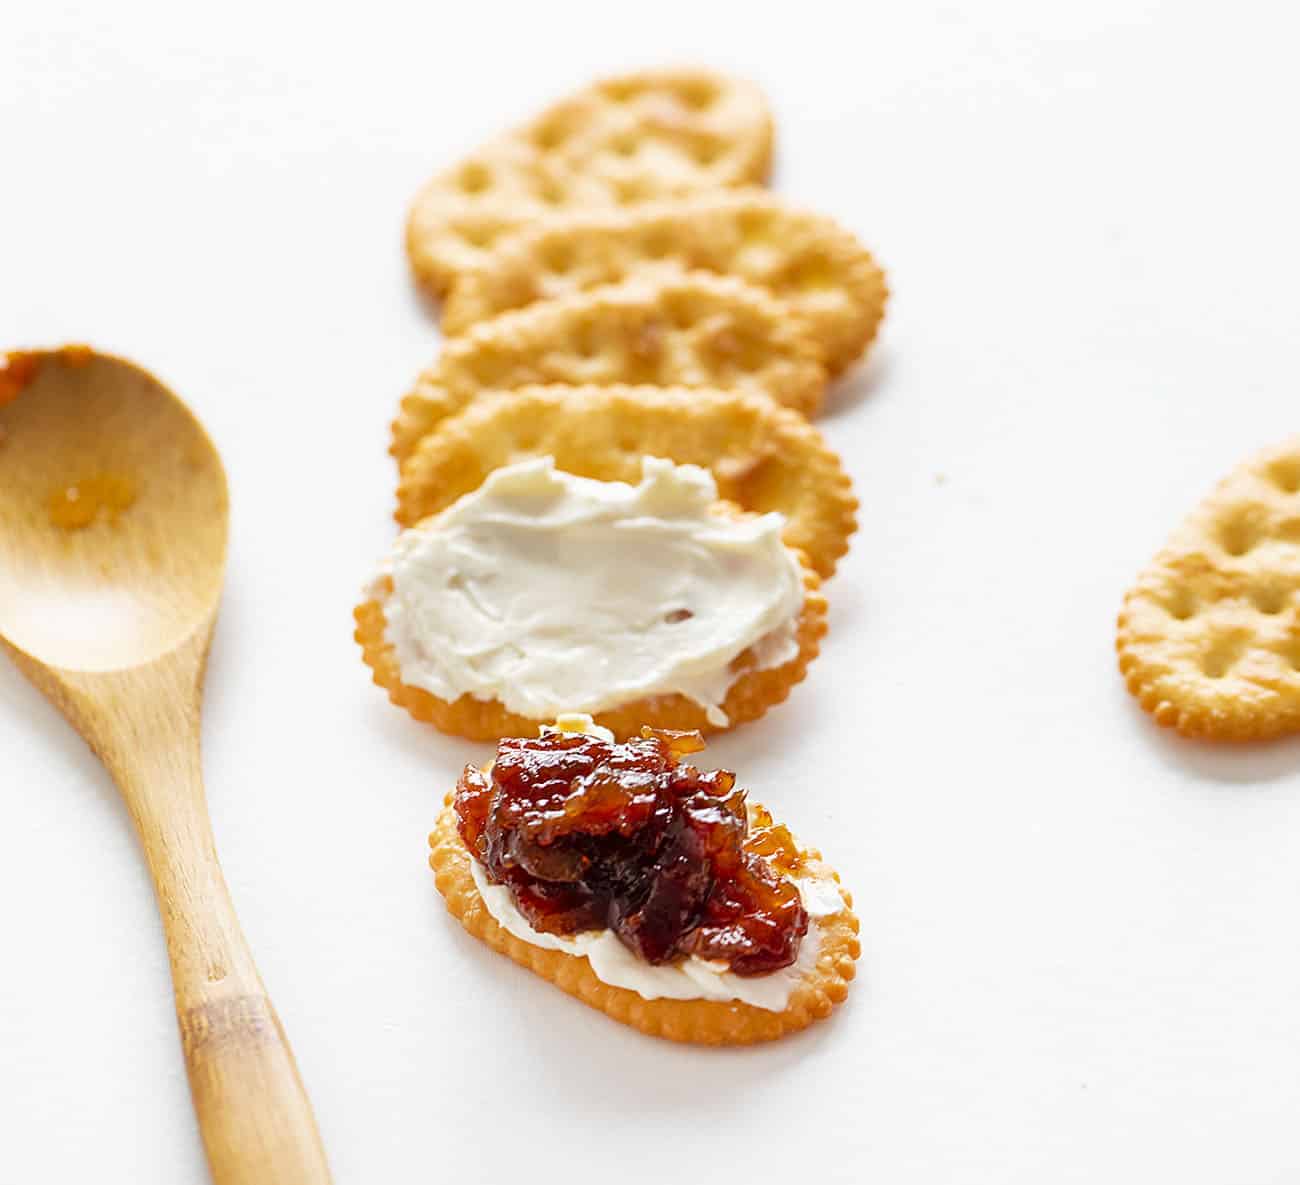 Onion Bacon Jam on a Cracker with Cream Cheese